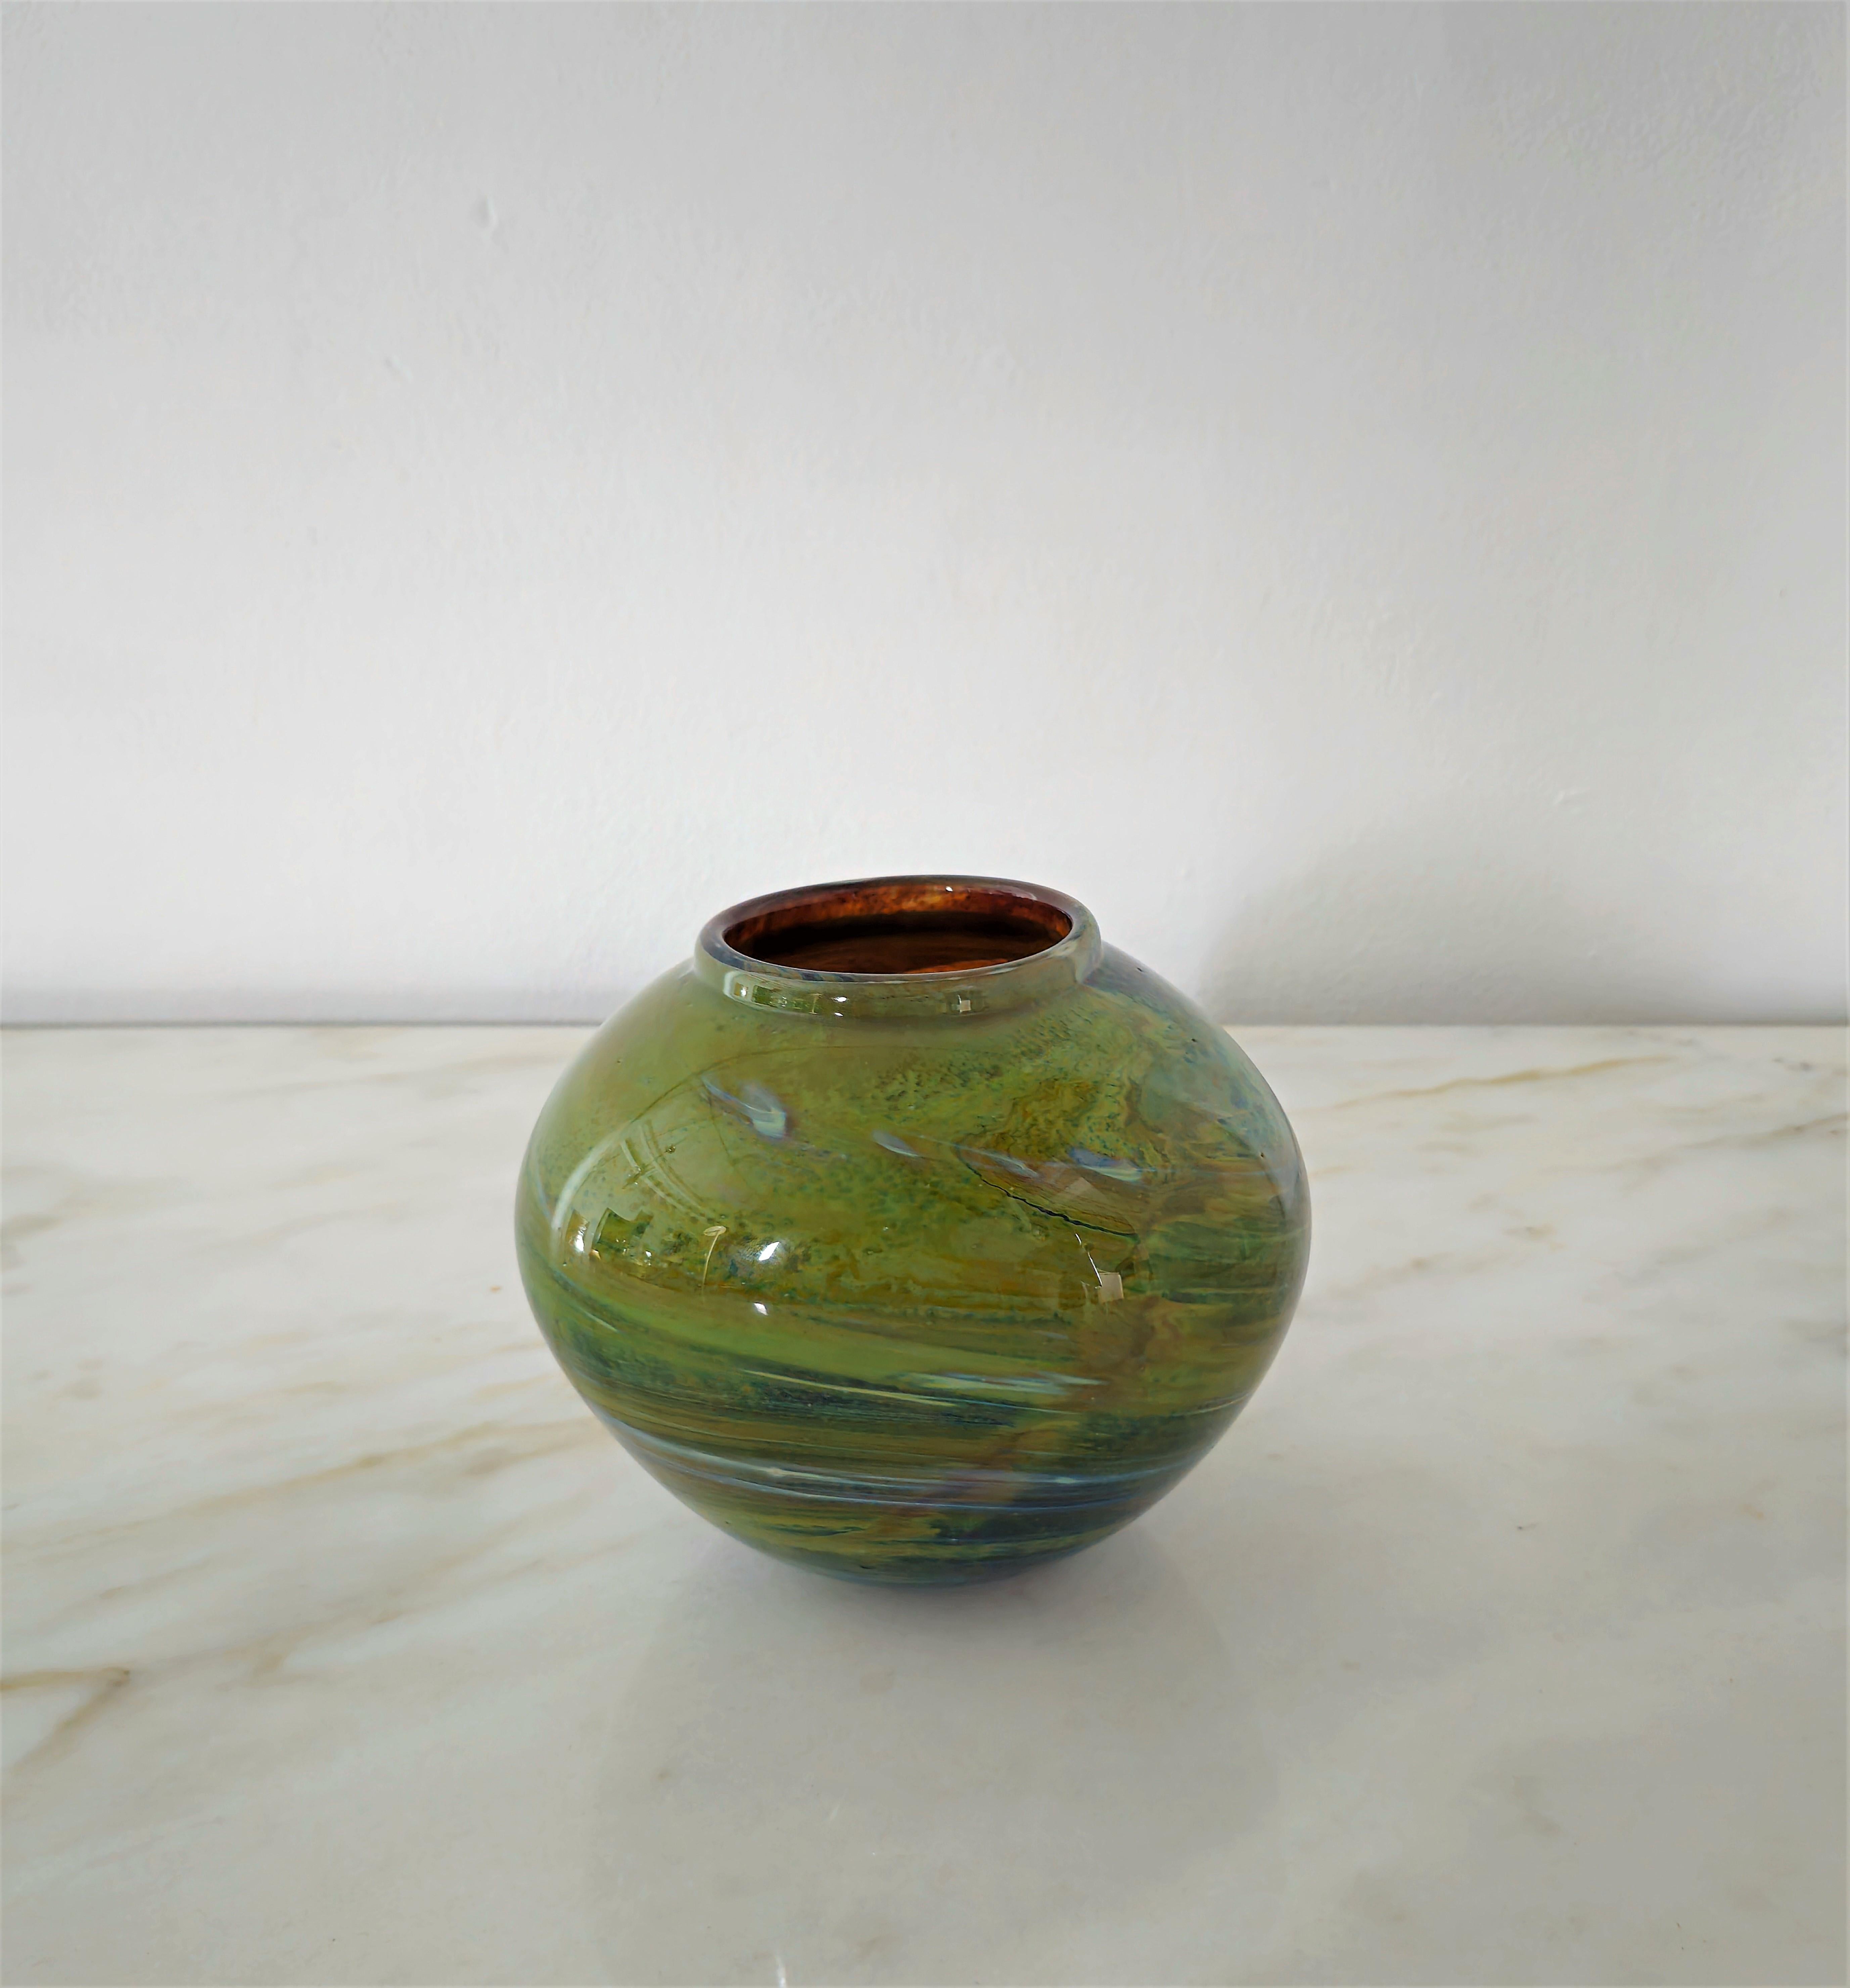 Vase Decorative Object Barovier & Toso Murano Glass Midcentury Italy 1960s For Sale 3